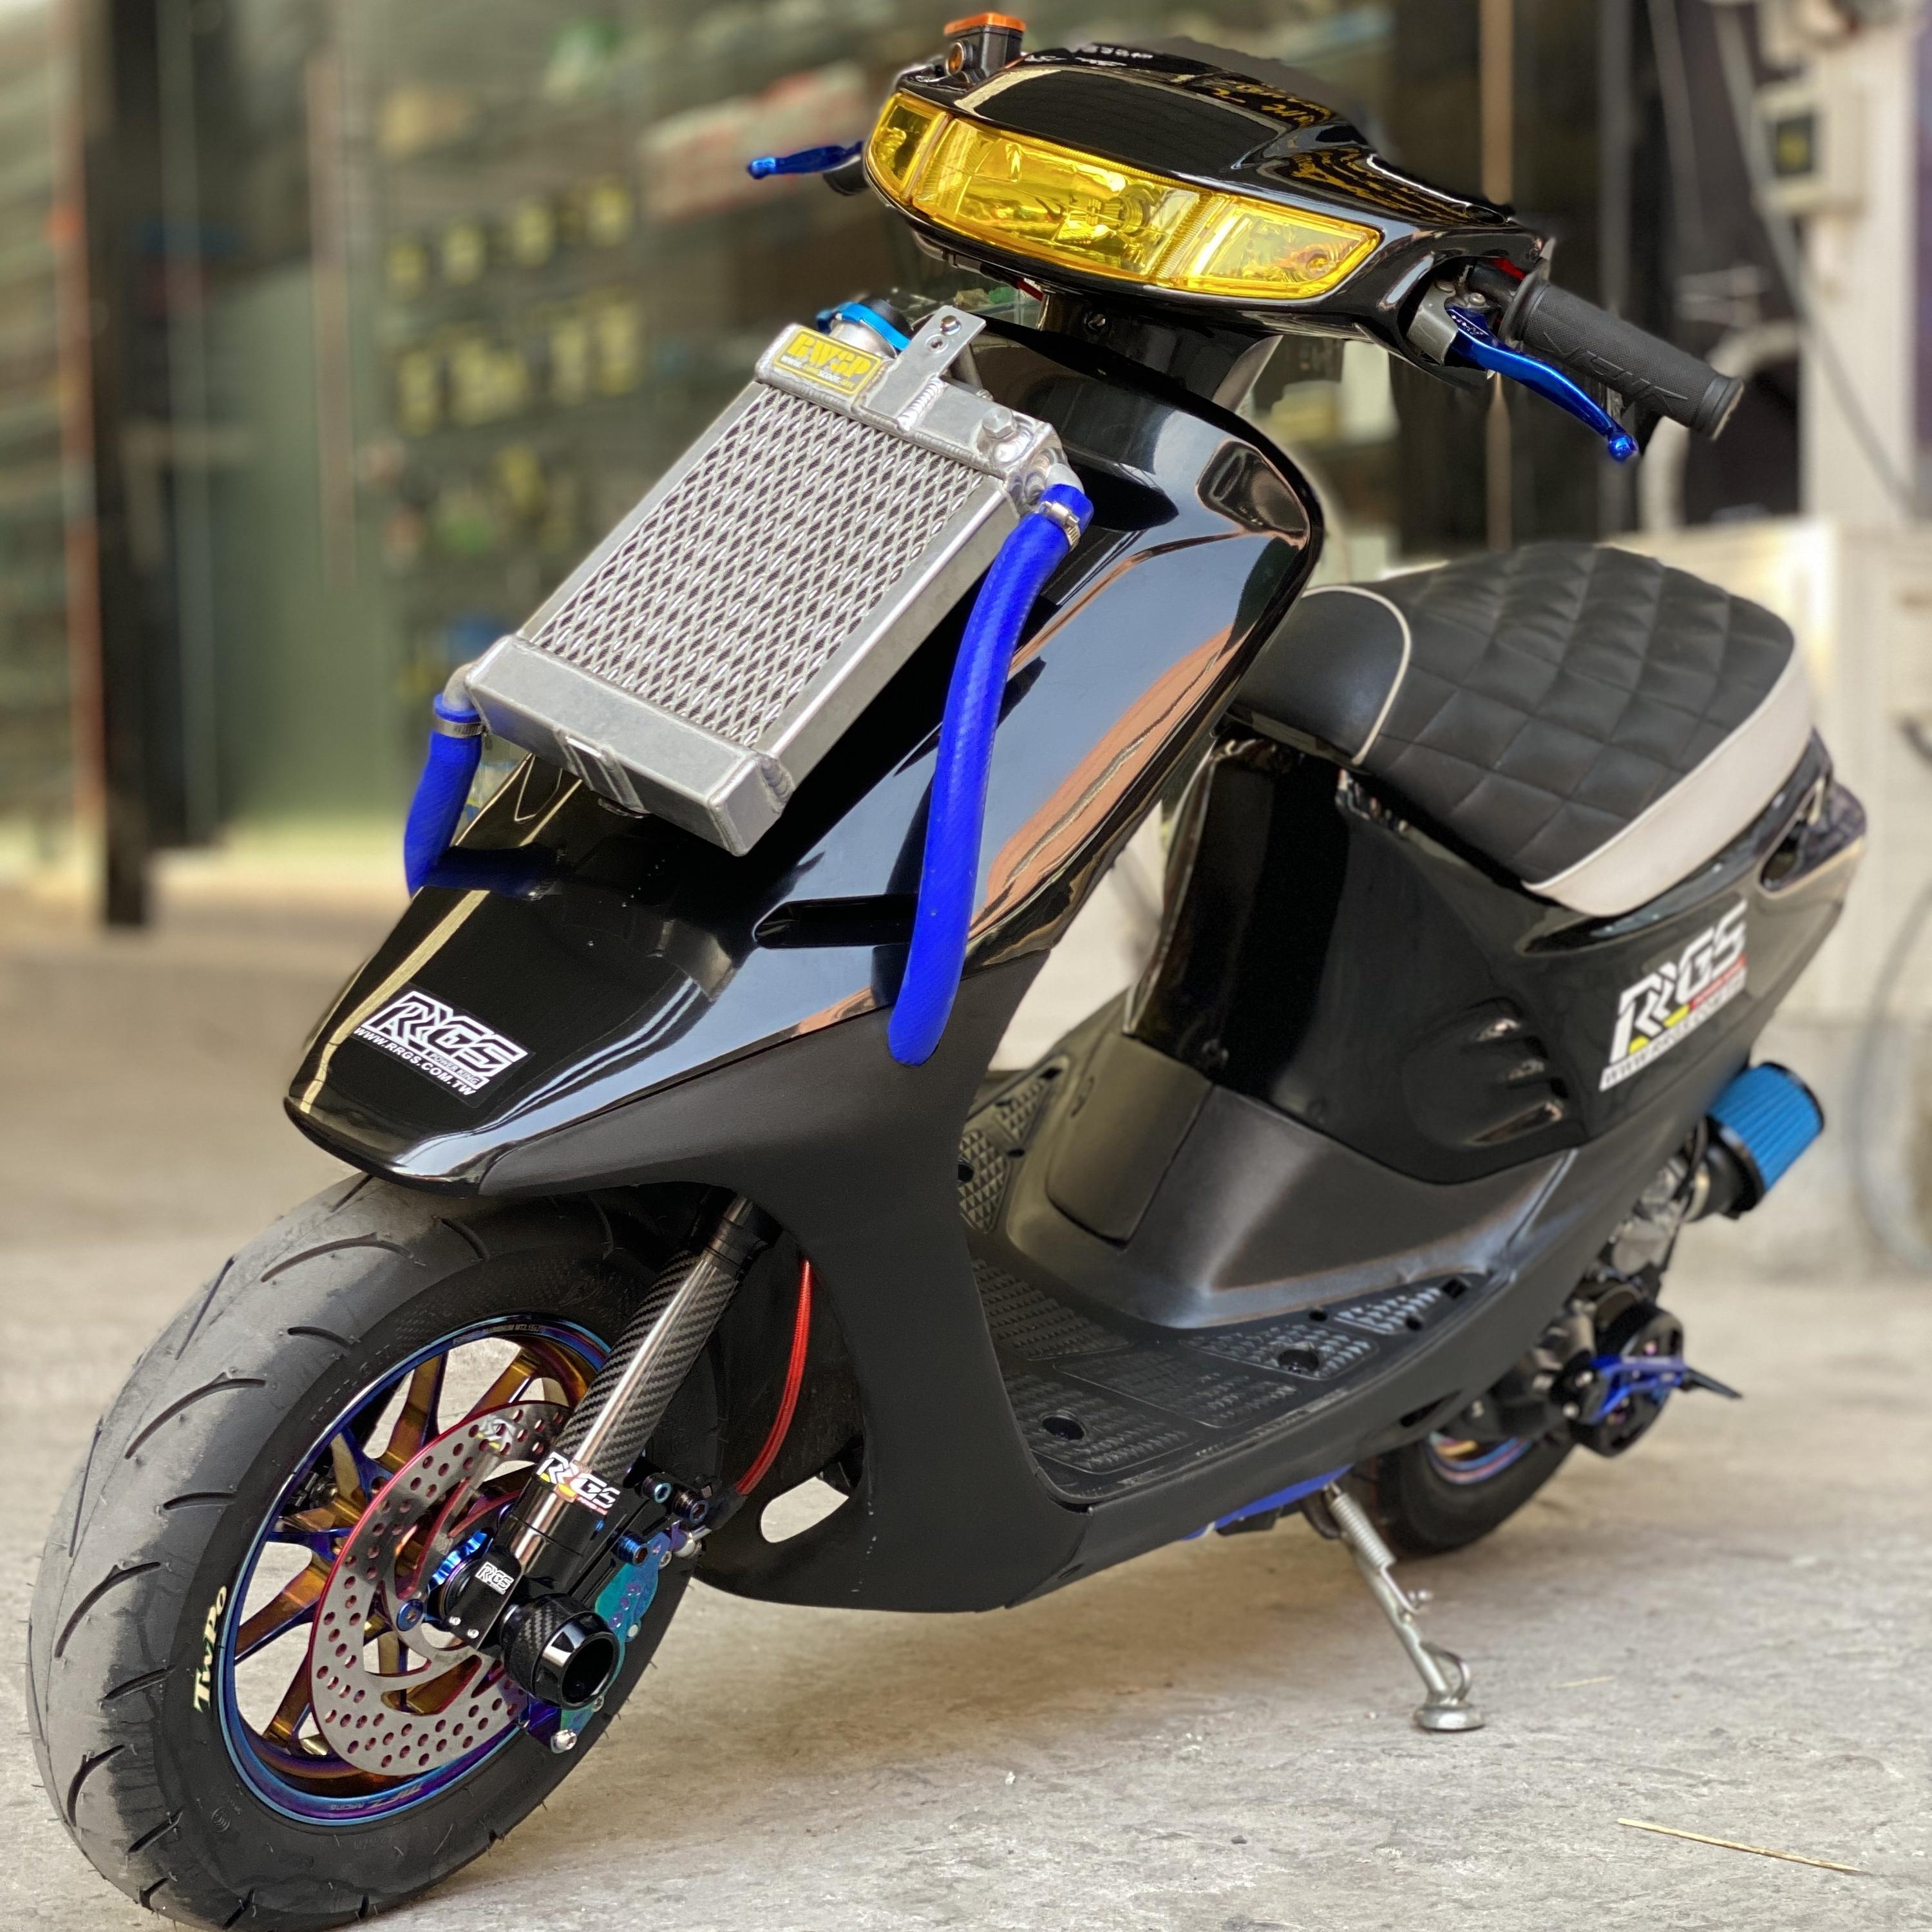 Scooter Honda DIO AF18 125cc water cooling BWSP special edition 